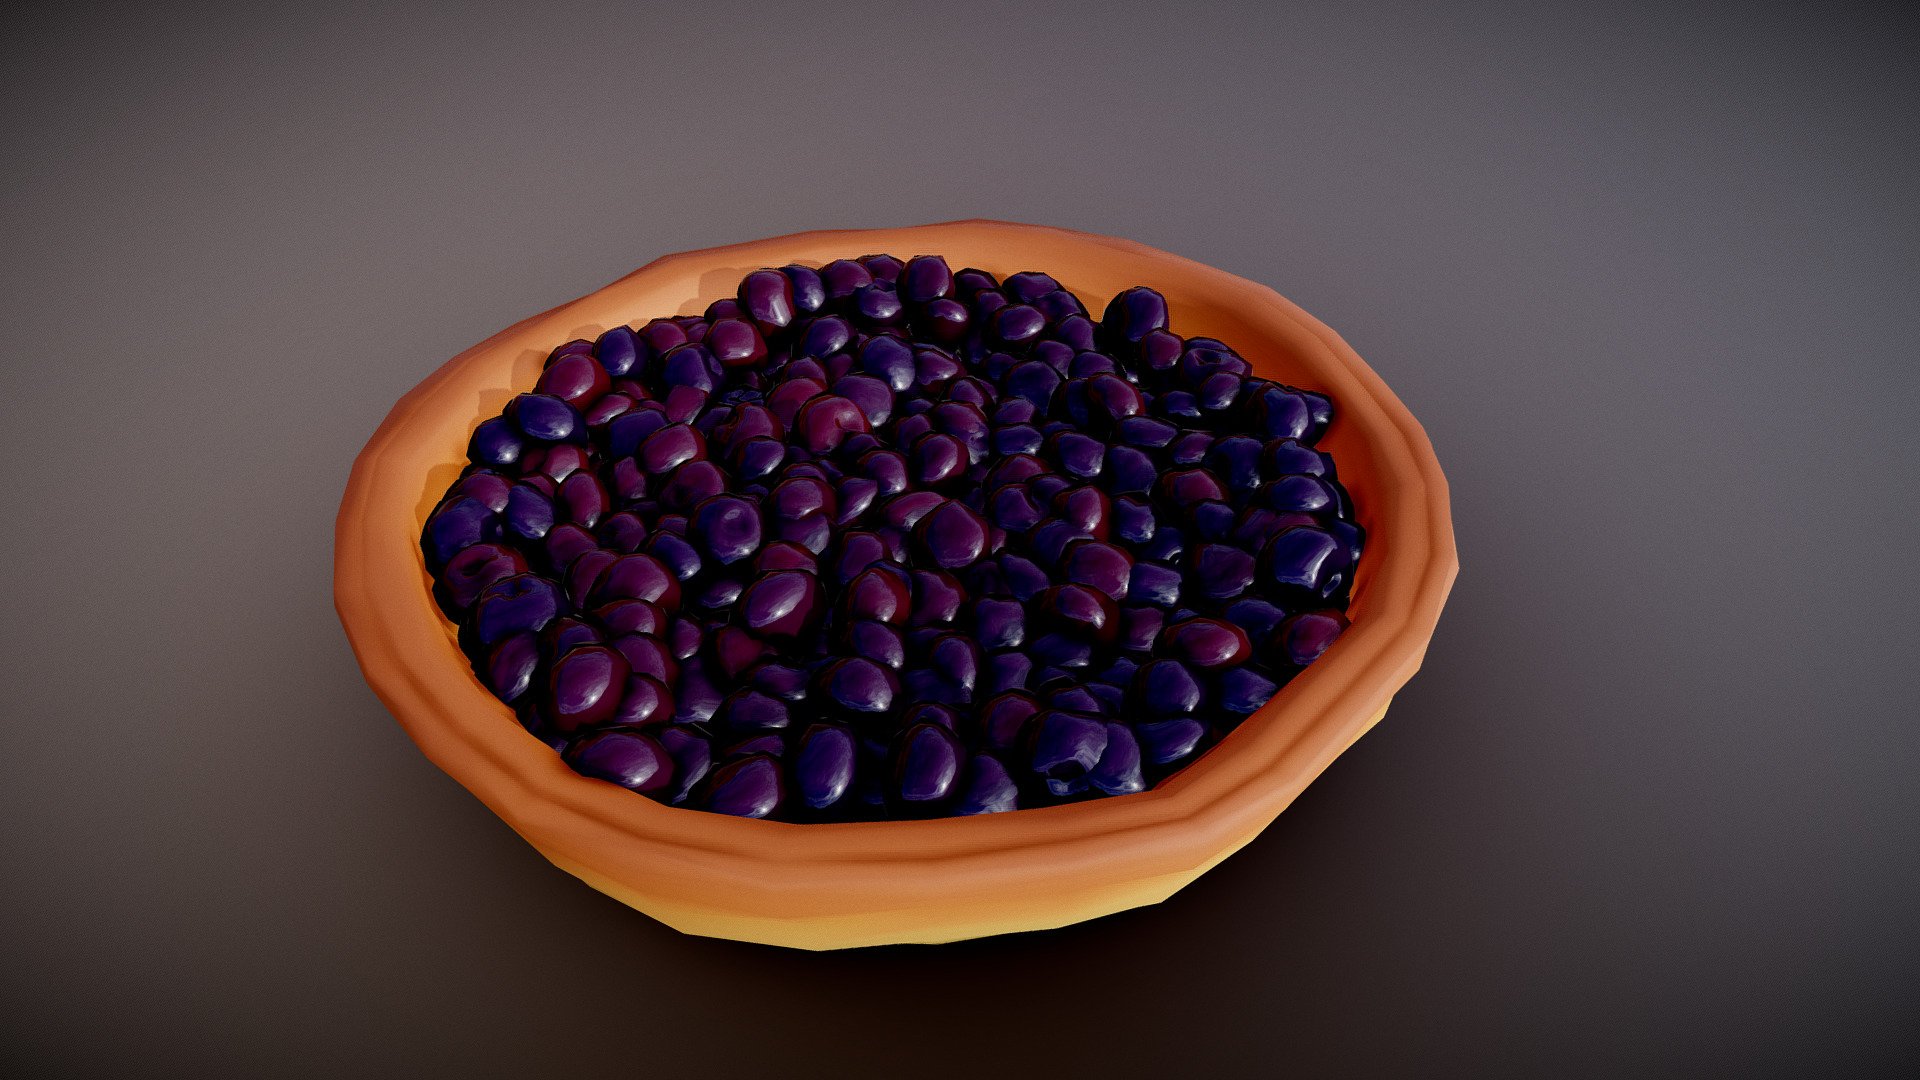 Sketchfab Weekly Challenge 2023 _ 9

Prompt : Pie

Style : Gradient stylized


SketchfabWeeklyChallenge2023 #SketchfabWeeklyChallenge
Basic, but still happy with it

Making of : https://youtu.be/wgEgbfxBF98 - Blueberry Pie - 3D model by Glub (@GlubGraphics) 3d model